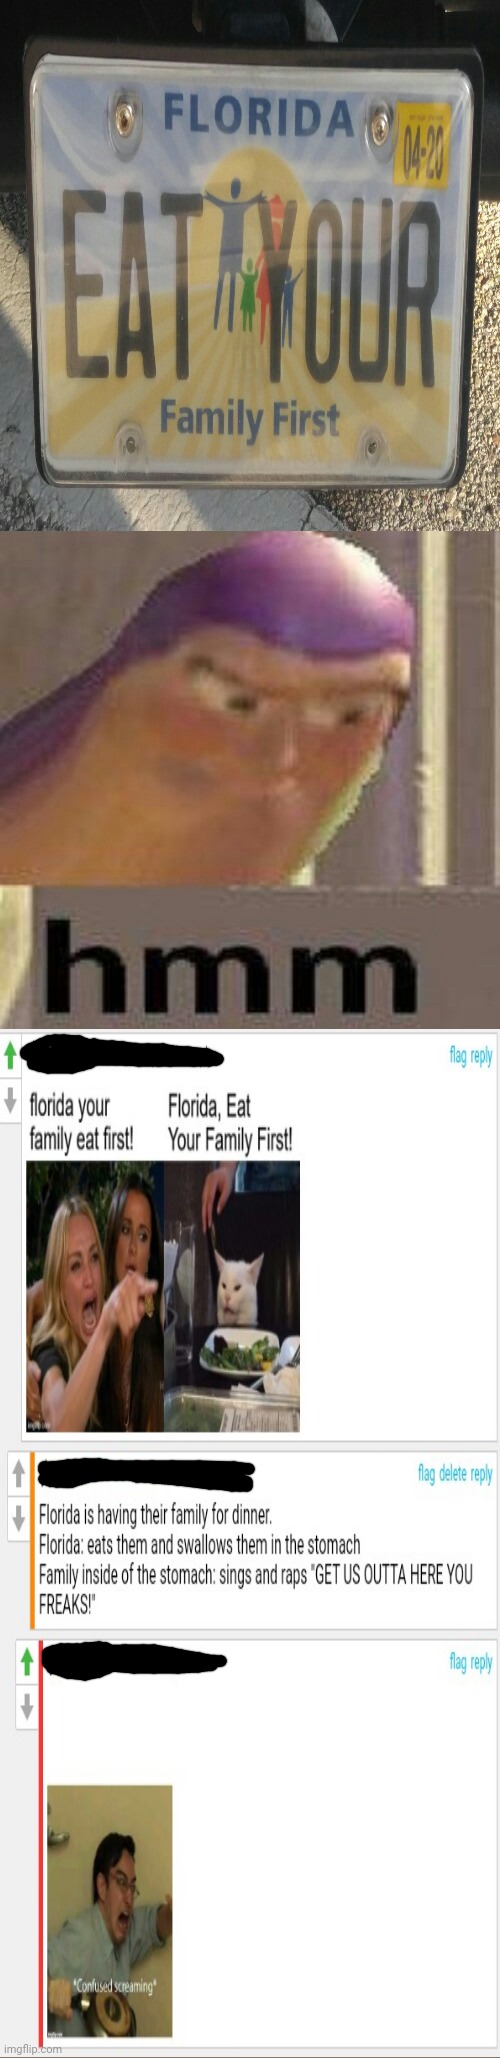 Cursed comments about the Florida license plate: Eat your family first | image tagged in cursed,comment section,comments,comment | made w/ Imgflip meme maker